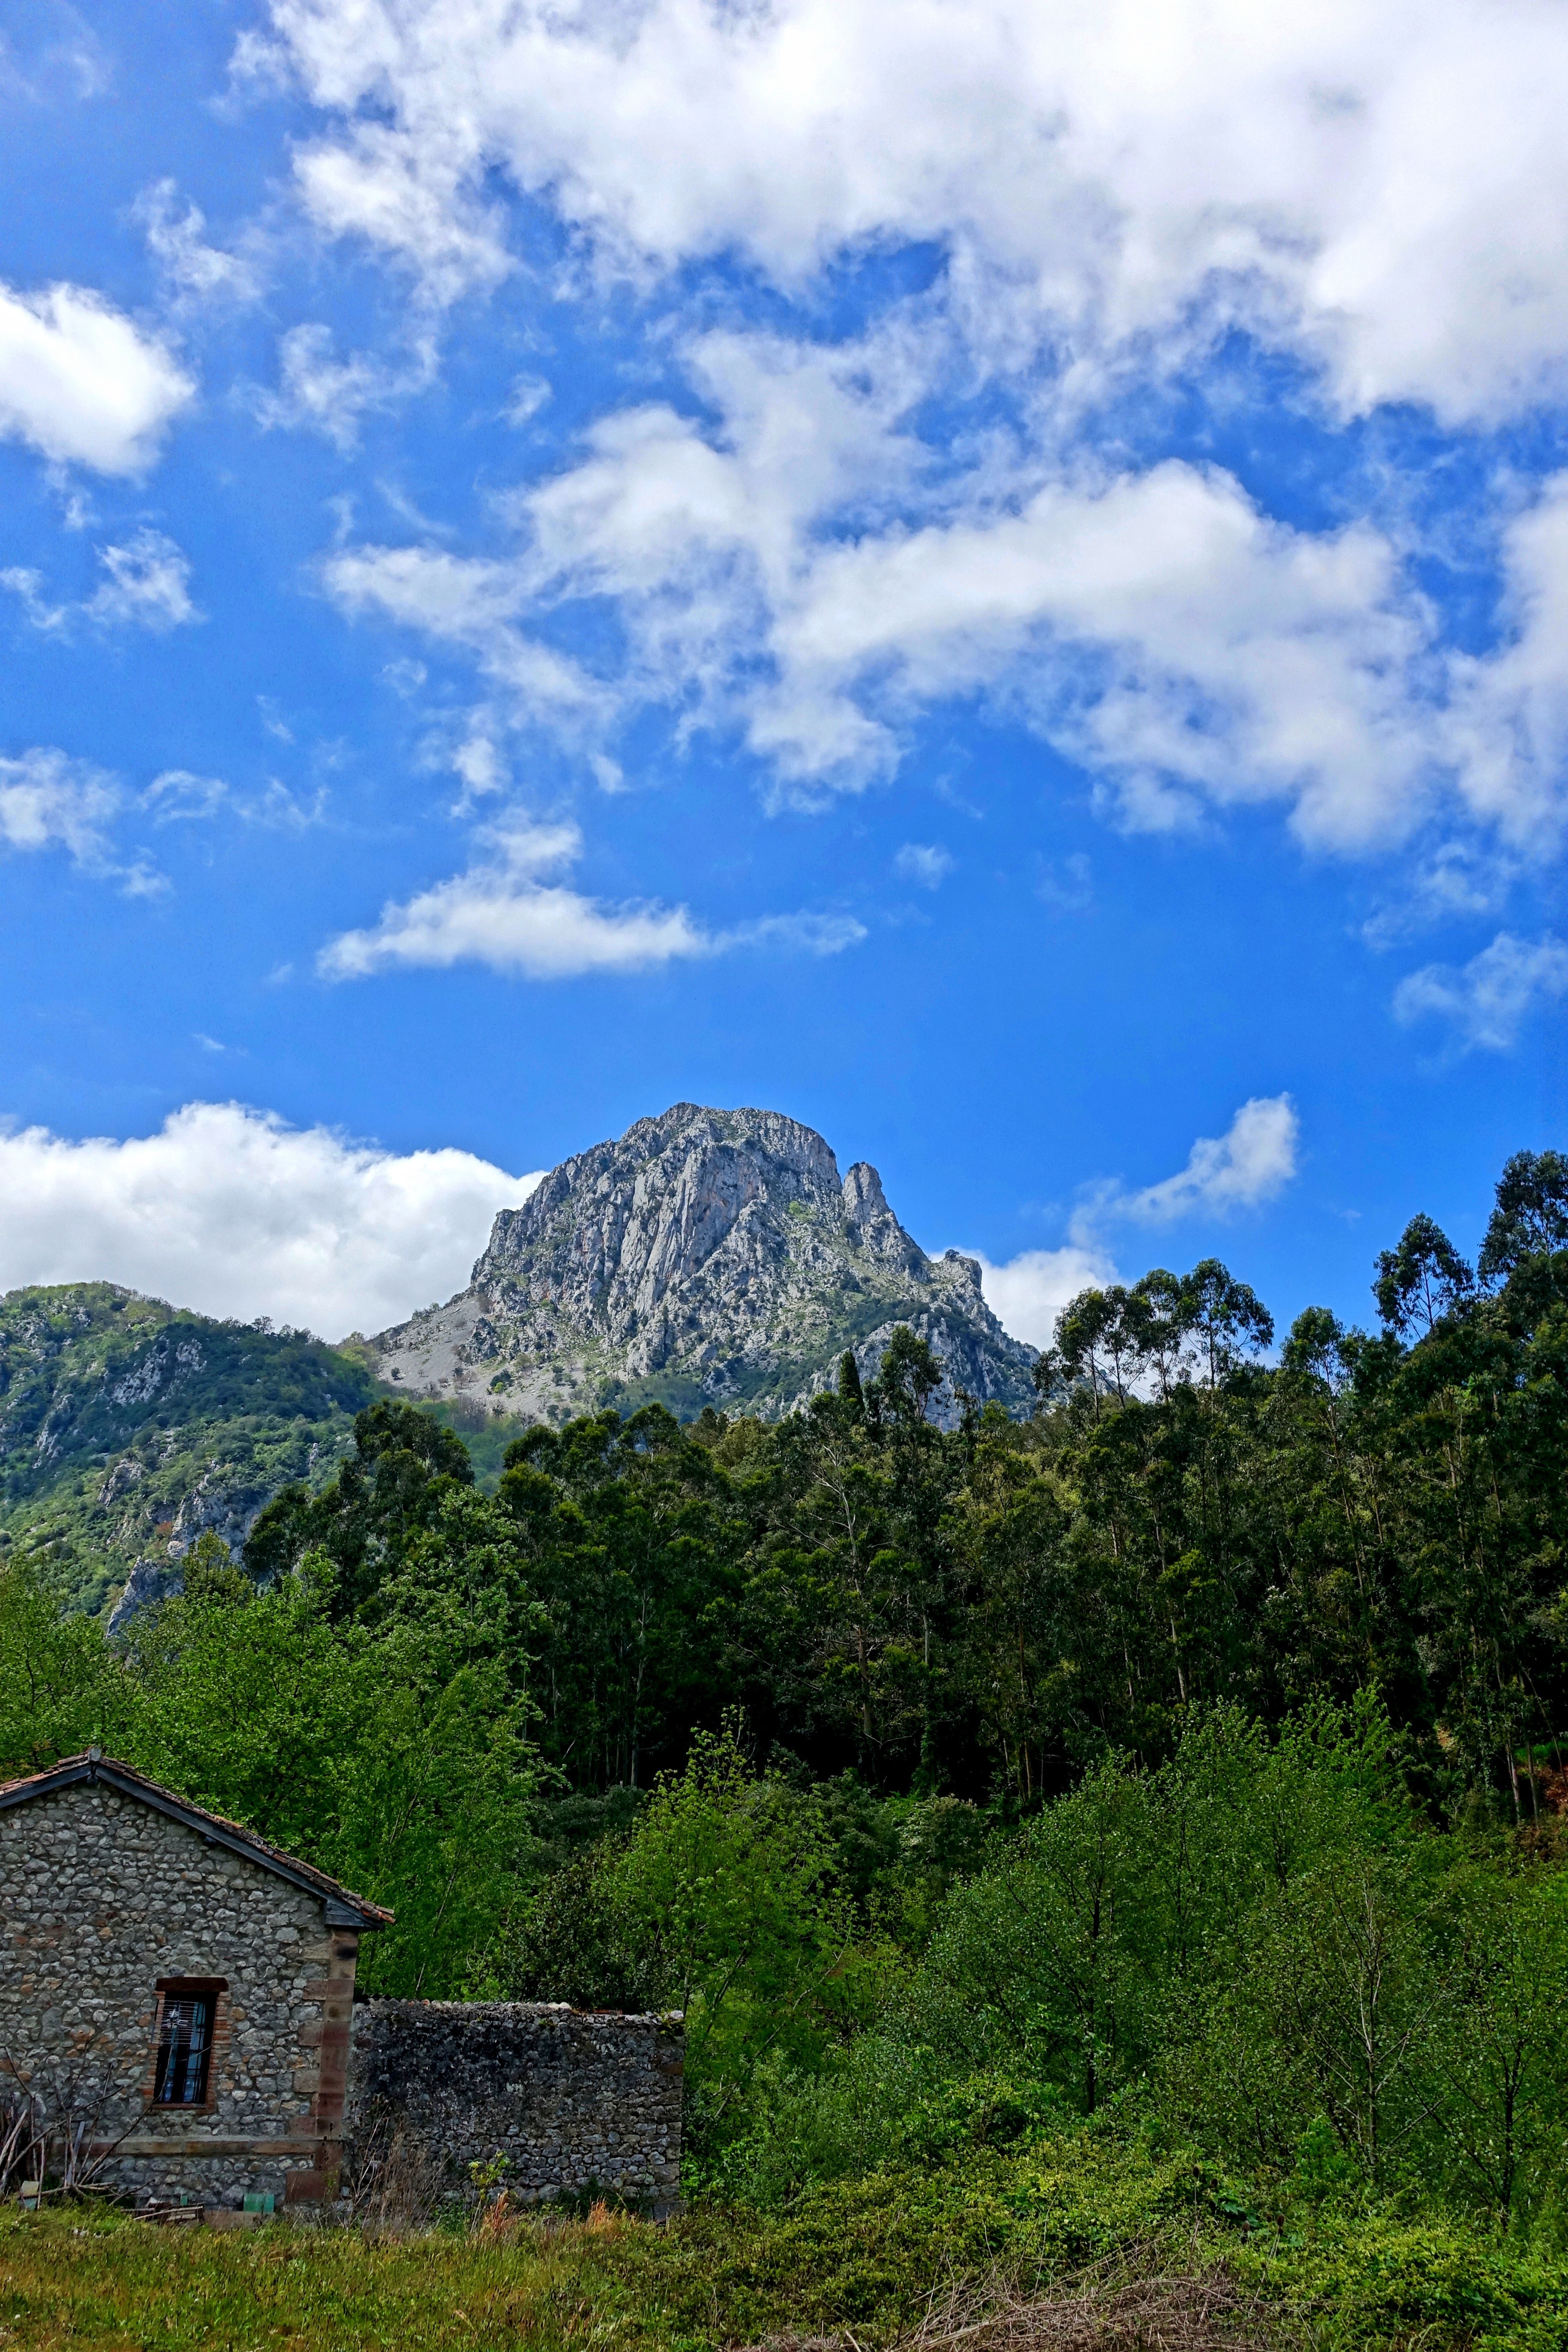 view of mountain surrounded by green trees under partly cloudy skies during daytime